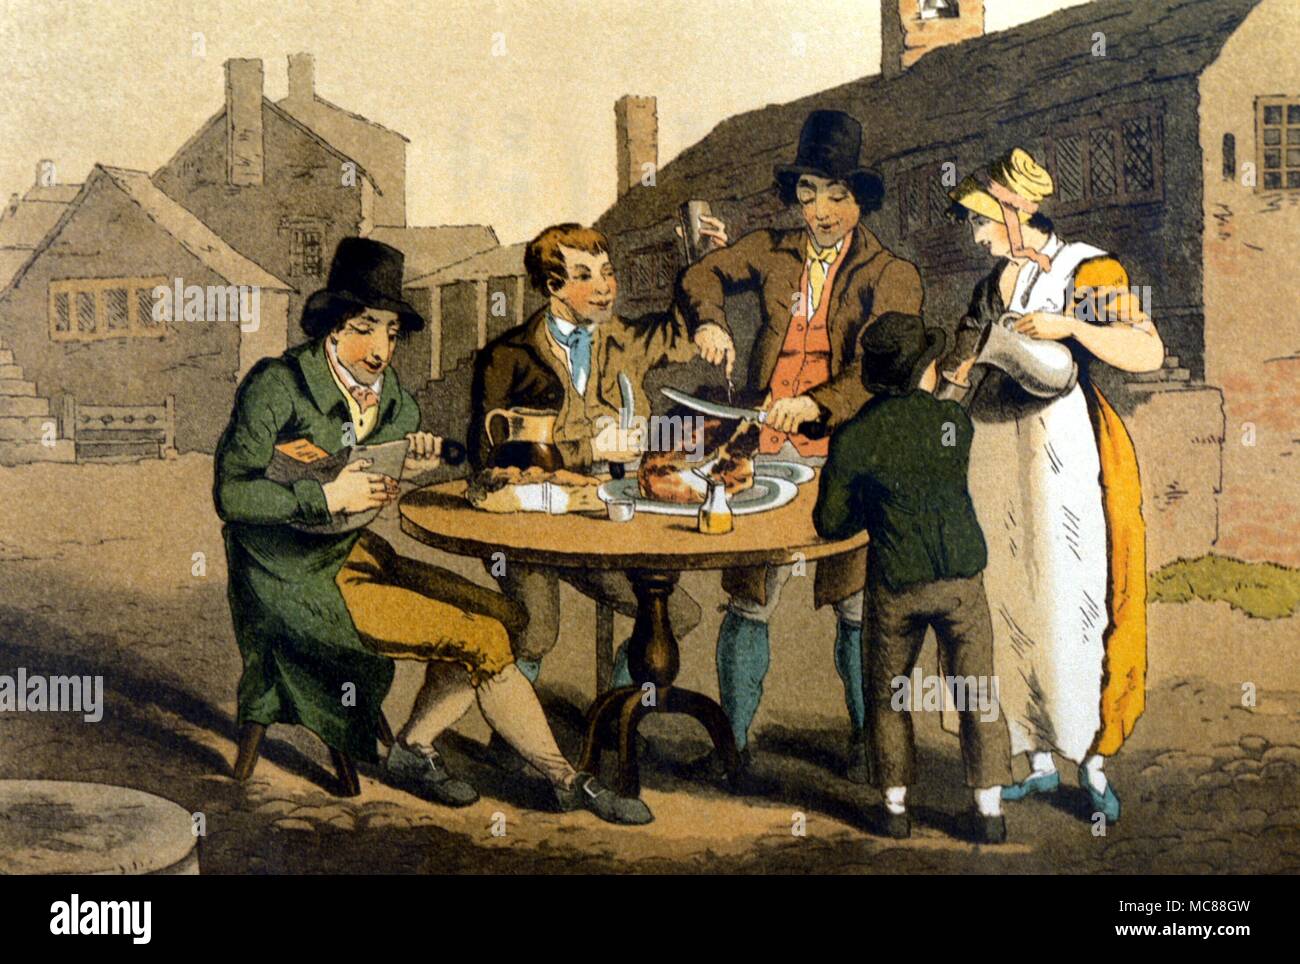 BRITISH HISTORY - EARLY 19TH CENTURY Midsummer Eve meal - a Yorkshire custom. From the 1885 edition of Richard Jackson's 'The costumes of Yorkshire'. Stock Photo